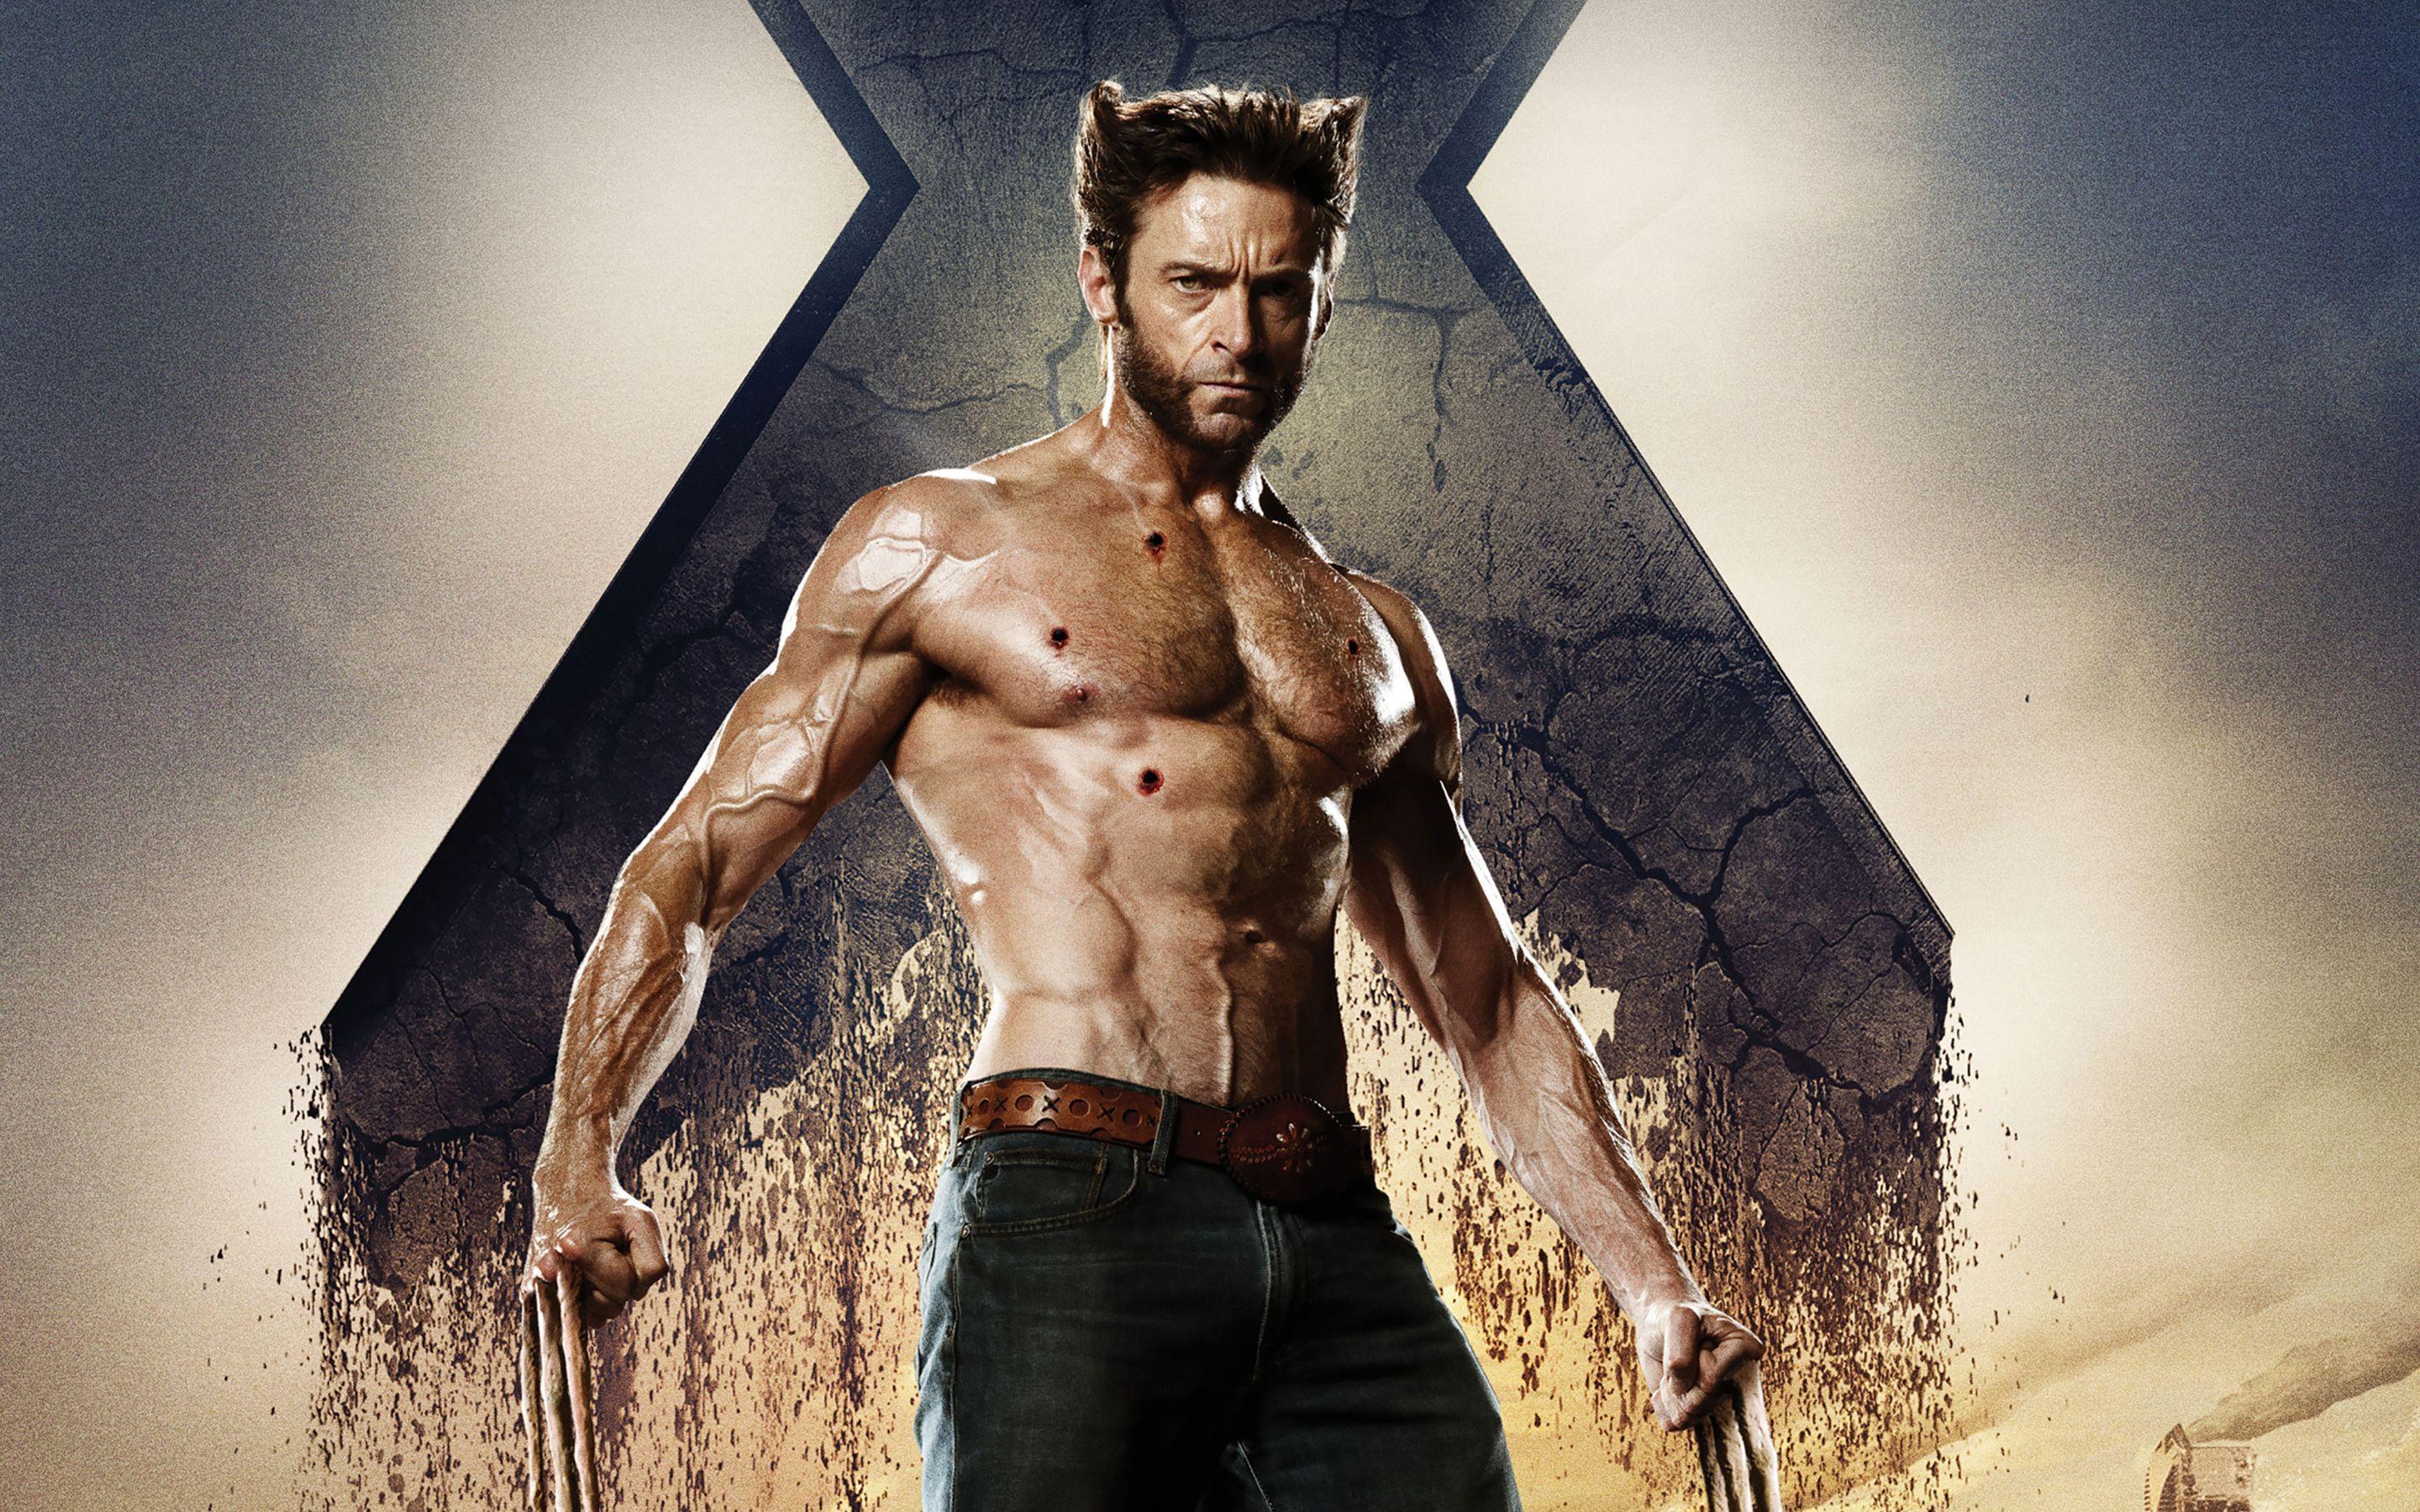 Looks Like the Next &;Wolverine&; Movie is Targeting an R Rating